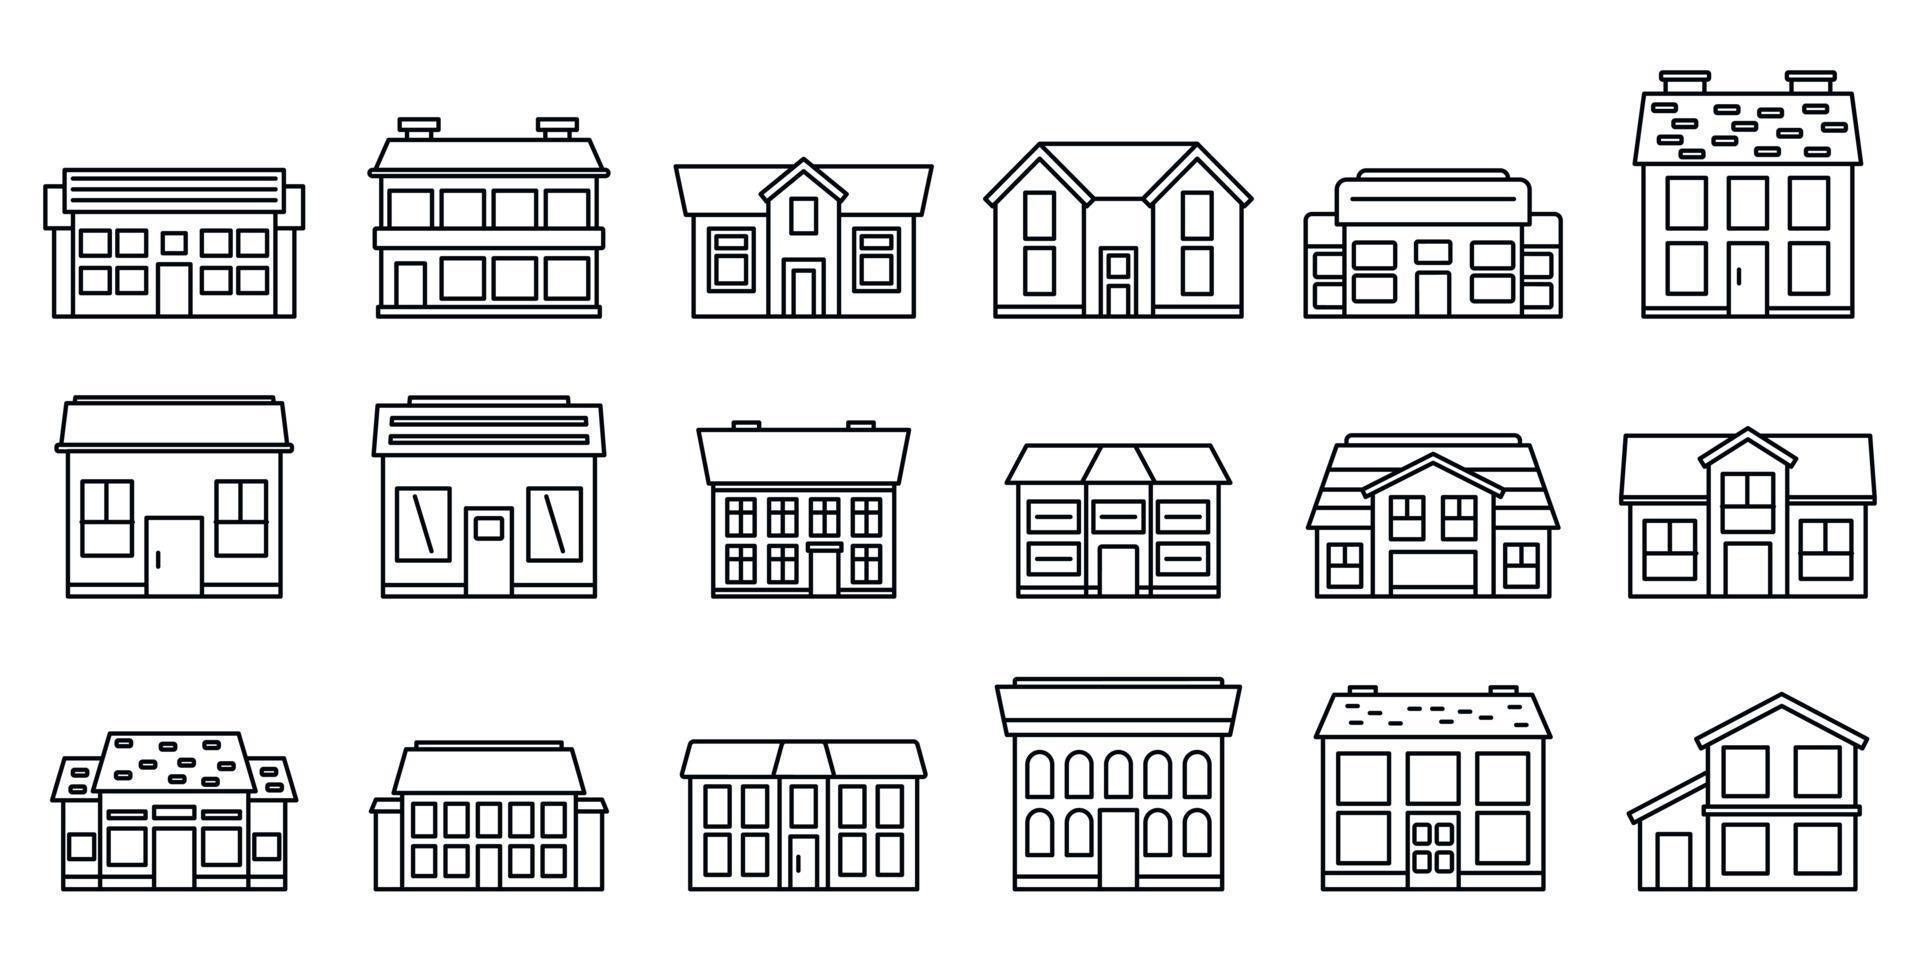 Cottage house icons set, outline style vector